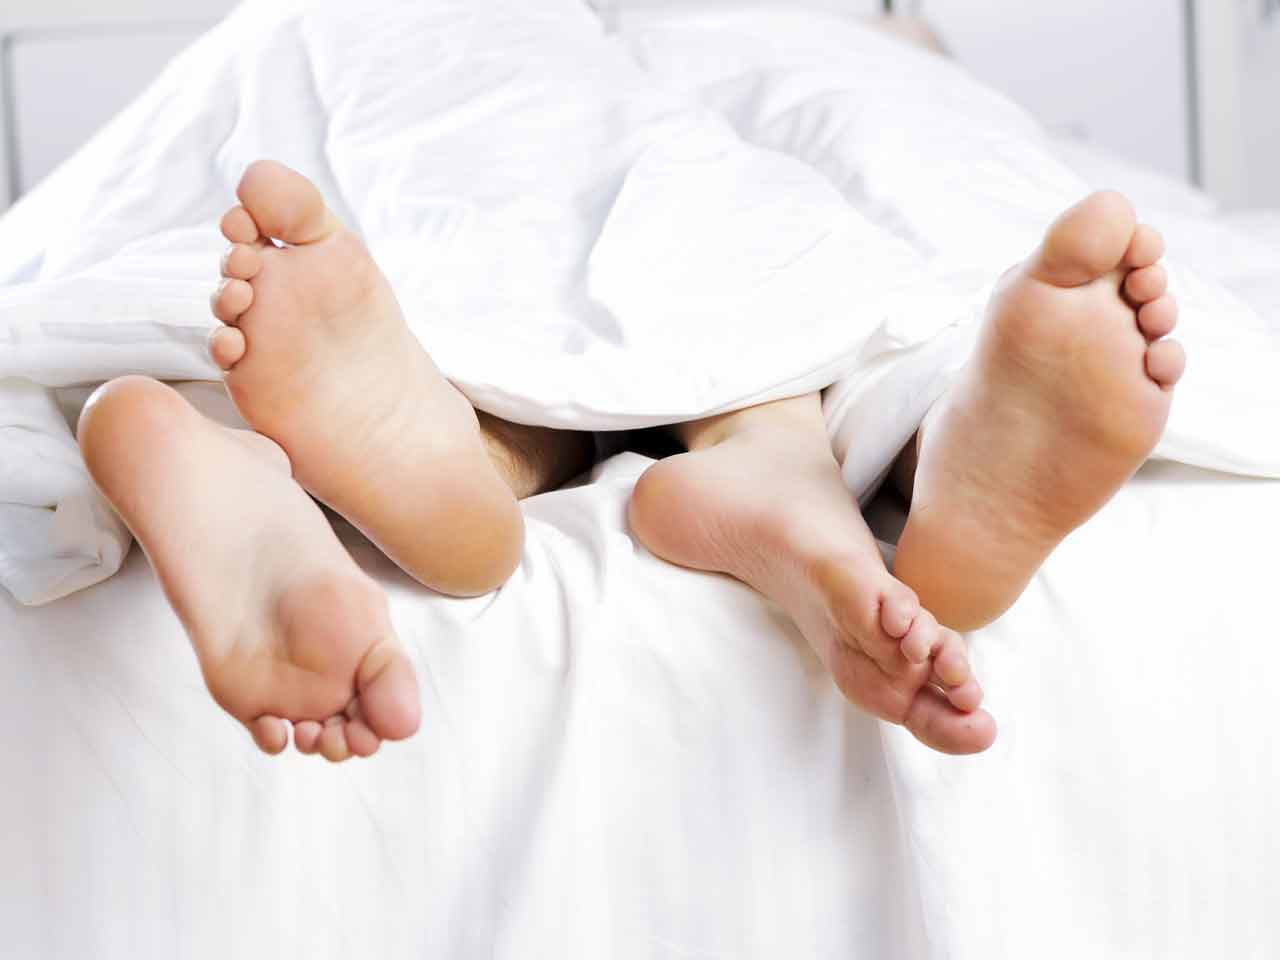 Two pairs of feet intertwined poking out the bottom of a duvet on a bed